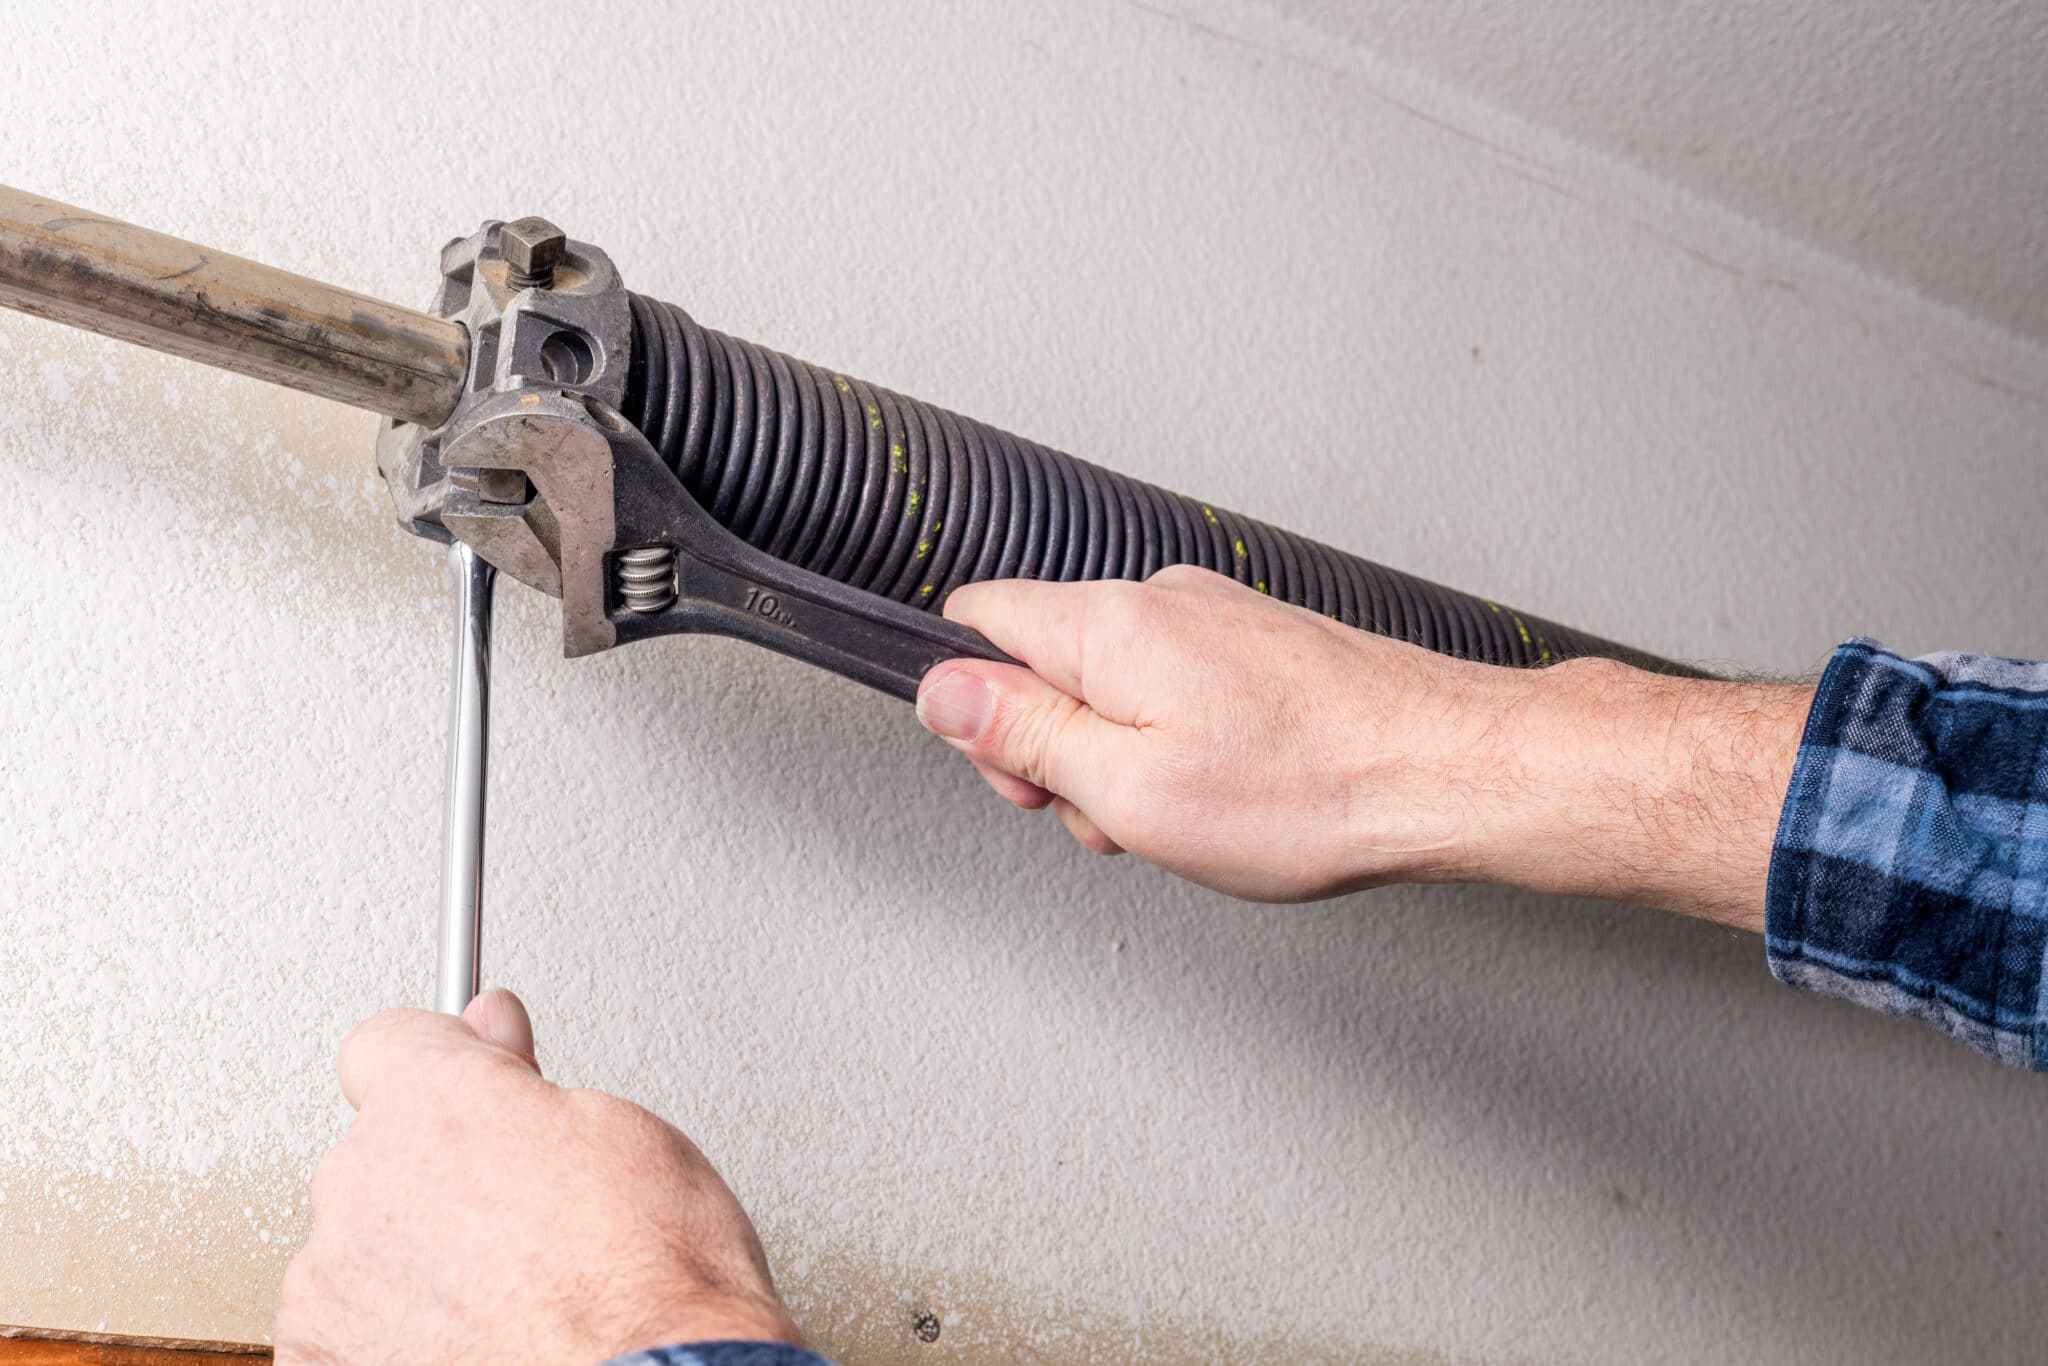 A garage door with a spring Maintenance Checking